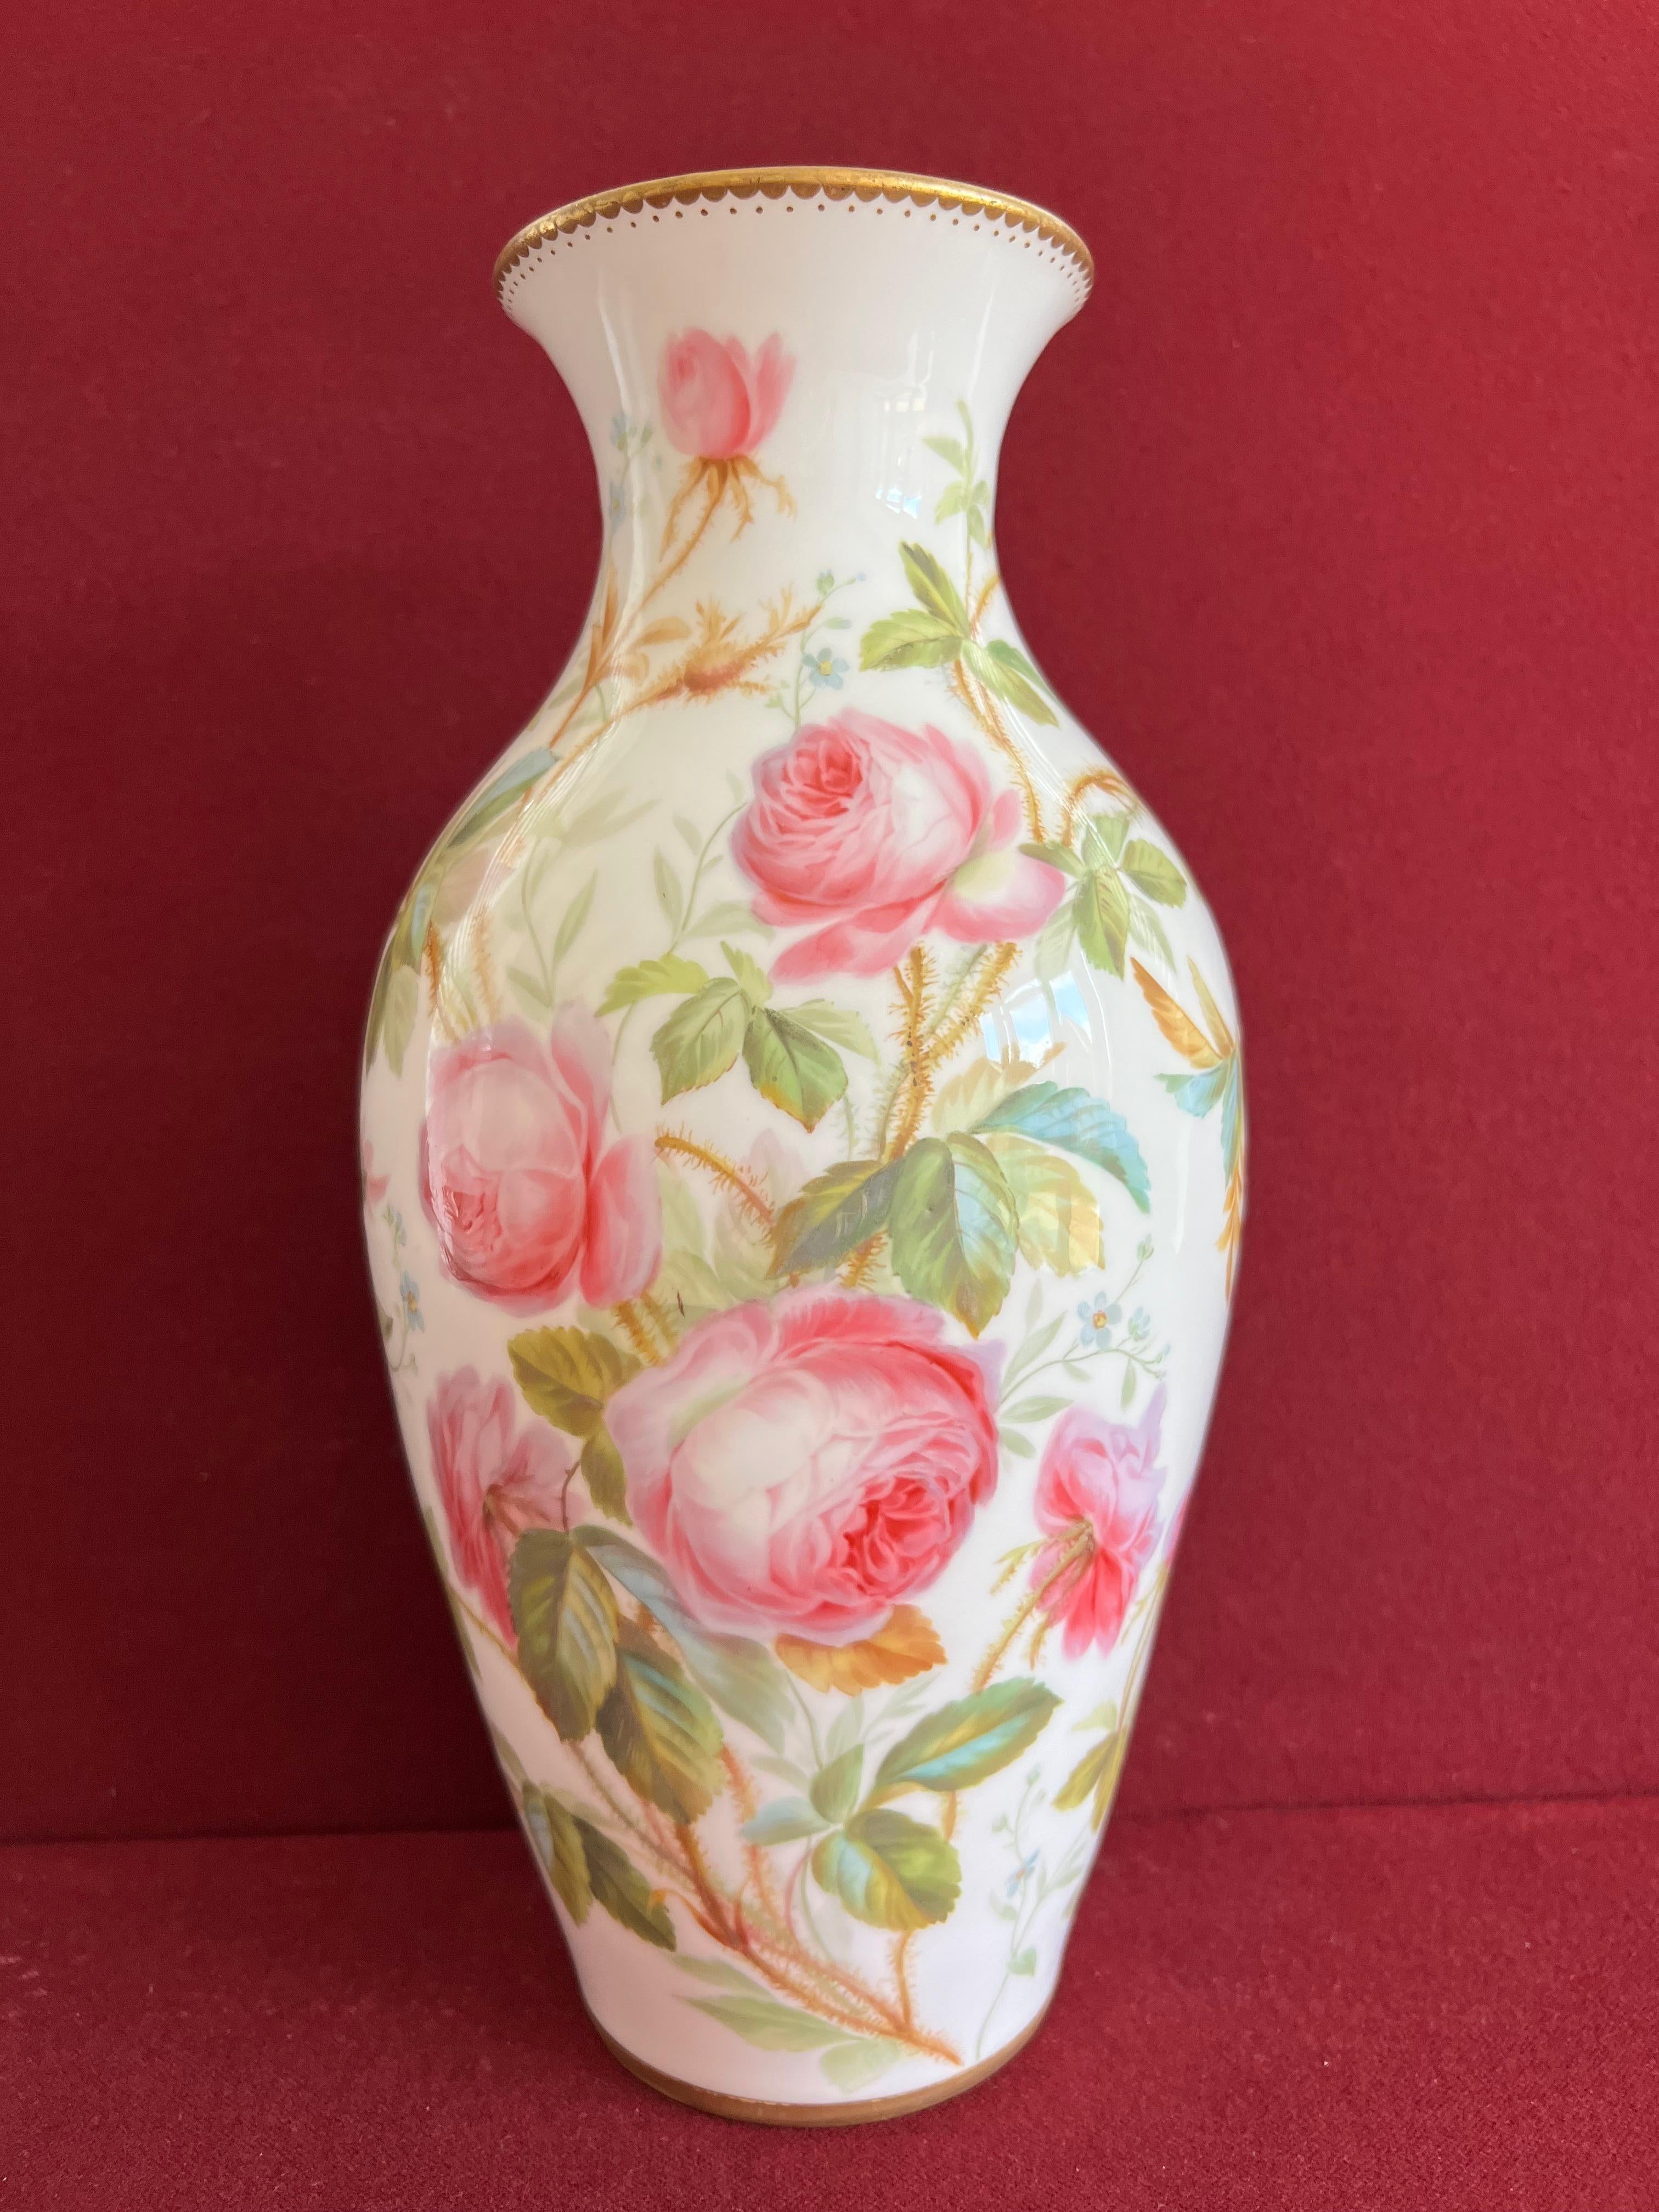 A wonderful Minton bone china vase c.1850. Superbly painted round the body with studies of roses in the manner of Jessie Smith. Small ermine-device mark. 29 cm high

Jessie Smith was apprenticed at the Minton Pottery in c.1831 and became known for